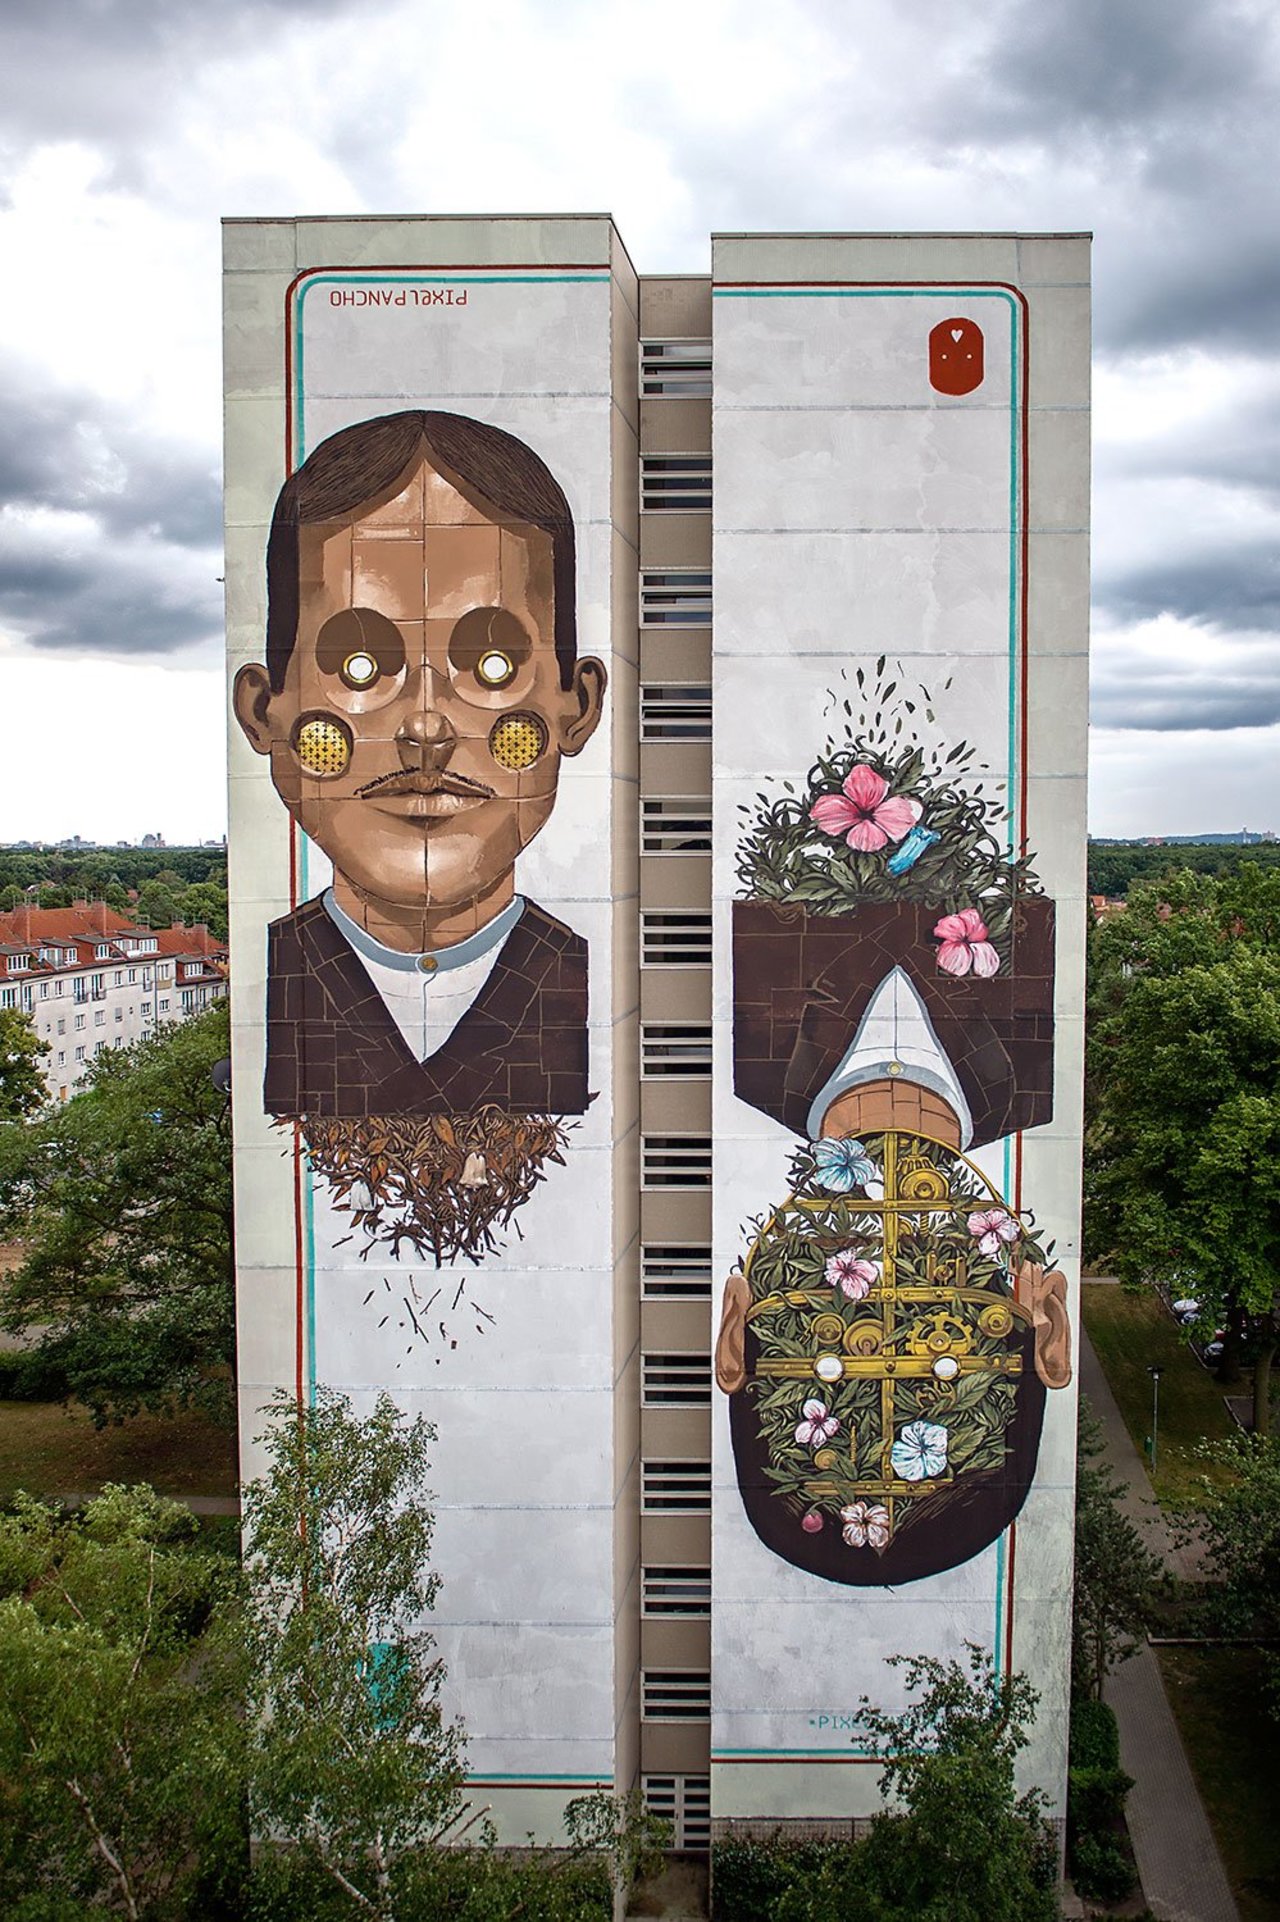 Pixel Pancho for Urban Nation in Berlin #streetart https://streetartnews.net/2016/07/pixel-pancho-for-urban-nation-in-berlin.html https://t.co/r84vAEcqa5